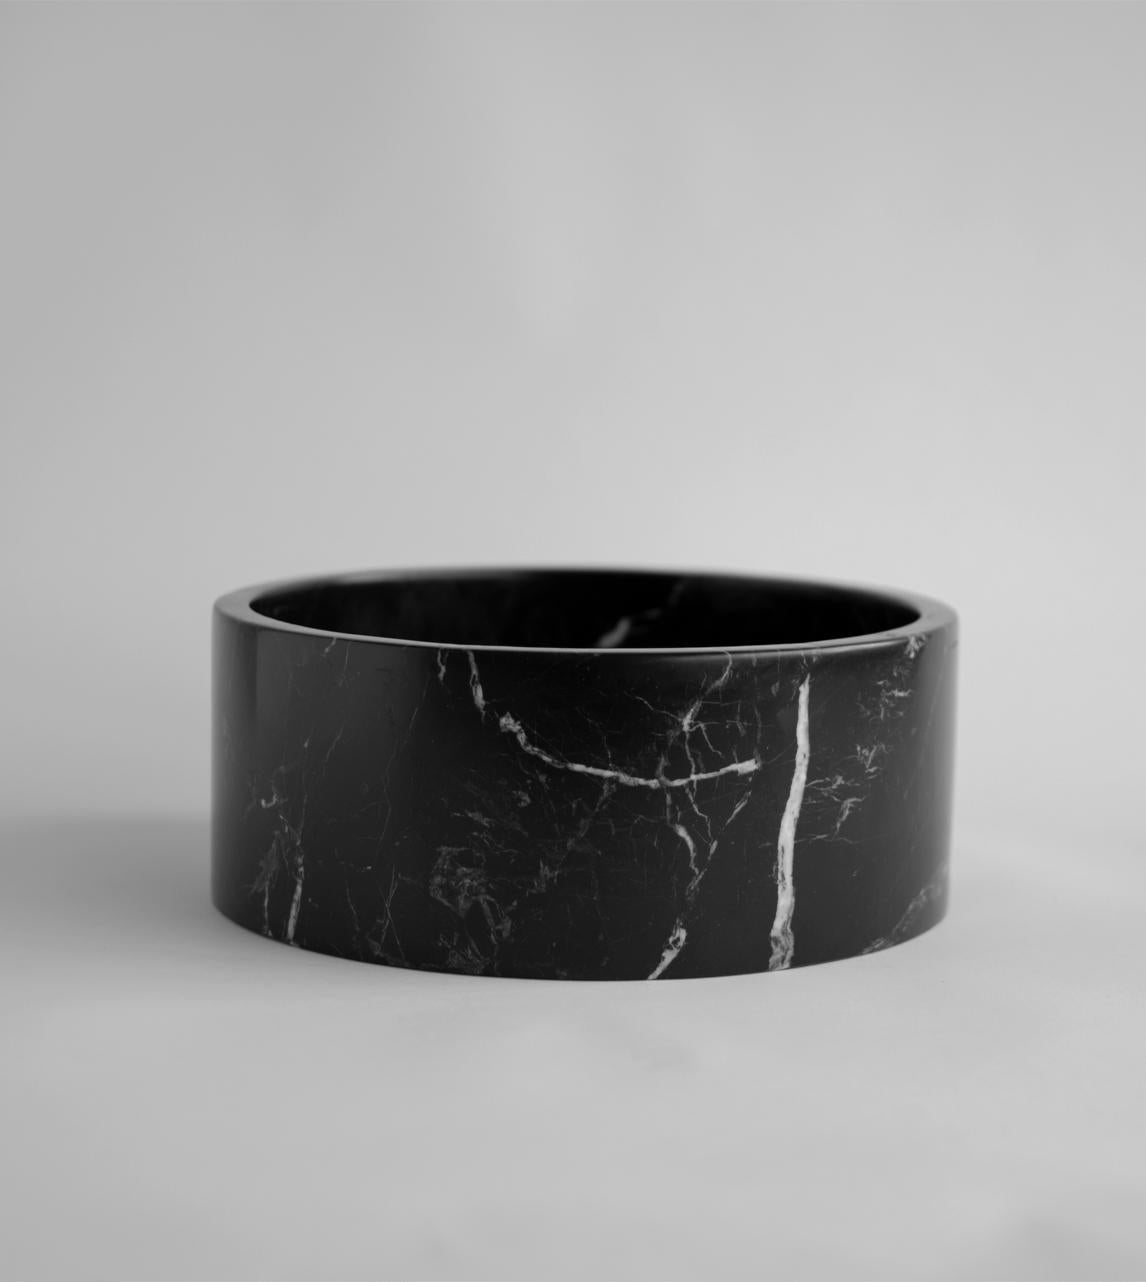 This substantial black marble bowl is beautifully handcrafted from a single piece of genuine Turkish Black Marble and honed for a silky mat finish. 

There may be natural variations that are not product flaws, they make your design truly